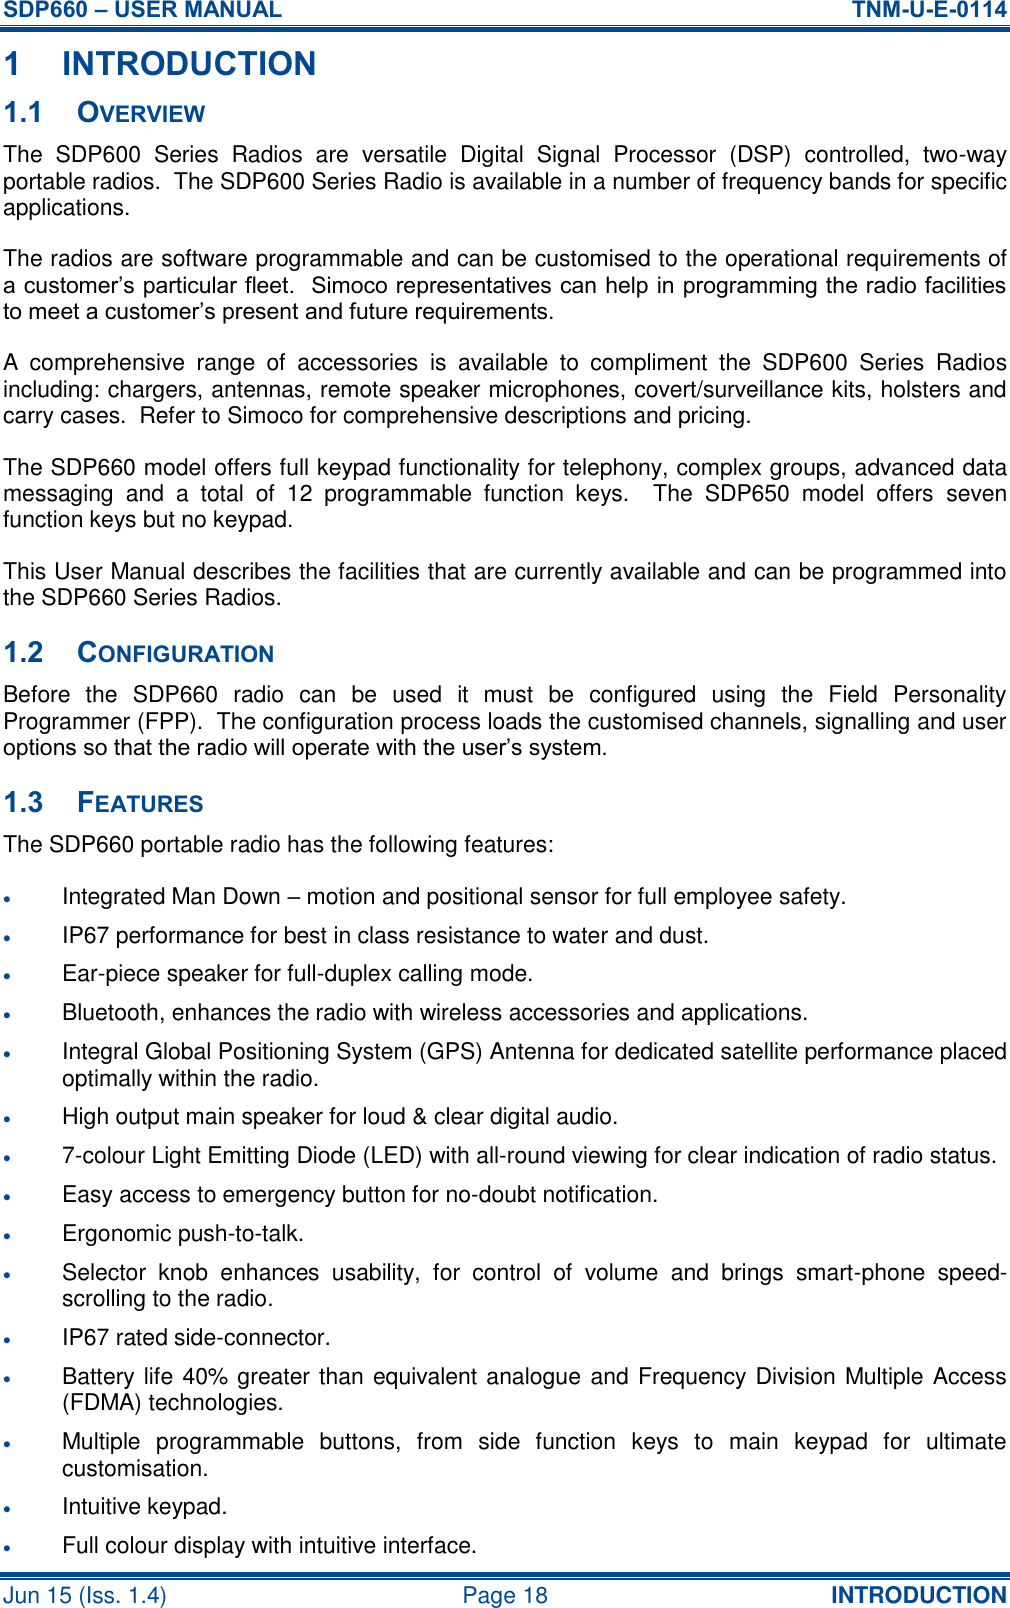 SDP660 – USER MANUAL  TNM-U-E-0114 Jun 15 (Iss. 1.4)  Page 18 INTRODUCTION 1 INTRODUCTION 1.1 OVERVIEW The  SDP600  Series  Radios  are  versatile  Digital  Signal  Processor  (DSP)  controlled,  two-way portable radios.  The SDP600 Series Radio is available in a number of frequency bands for specific applications. The radios are software programmable and can be customised to the operational requirements of a customer’s particular fleet.  Simoco representatives can help in programming the radio facilities to meet a customer’s present and future requirements. A  comprehensive  range  of  accessories  is  available  to  compliment  the  SDP600  Series  Radios including: chargers, antennas, remote speaker microphones, covert/surveillance kits, holsters and carry cases.  Refer to Simoco for comprehensive descriptions and pricing. The SDP660 model offers full keypad functionality for telephony, complex groups, advanced data messaging  and  a  total  of  12  programmable  function  keys.    The  SDP650  model  offers  seven function keys but no keypad. This User Manual describes the facilities that are currently available and can be programmed into the SDP660 Series Radios. 1.2 CONFIGURATION Before  the  SDP660  radio  can  be  used  it  must  be  configured  using  the  Field  Personality Programmer (FPP).  The configuration process loads the customised channels, signalling and user options so that the radio will operate with the user’s system. 1.3 FEATURES The SDP660 portable radio has the following features:  Integrated Man Down – motion and positional sensor for full employee safety.  IP67 performance for best in class resistance to water and dust.  Ear-piece speaker for full-duplex calling mode.  Bluetooth, enhances the radio with wireless accessories and applications.  Integral Global Positioning System (GPS) Antenna for dedicated satellite performance placed optimally within the radio.  High output main speaker for loud &amp; clear digital audio.  7-colour Light Emitting Diode (LED) with all-round viewing for clear indication of radio status.  Easy access to emergency button for no-doubt notification.  Ergonomic push-to-talk.  Selector  knob  enhances  usability,  for  control  of  volume  and  brings  smart-phone  speed-scrolling to the radio.  IP67 rated side-connector.  Battery life 40% greater than equivalent analogue and Frequency Division Multiple Access (FDMA) technologies.  Multiple  programmable  buttons,  from  side  function  keys  to  main  keypad  for  ultimate customisation.  Intuitive keypad.  Full colour display with intuitive interface. 